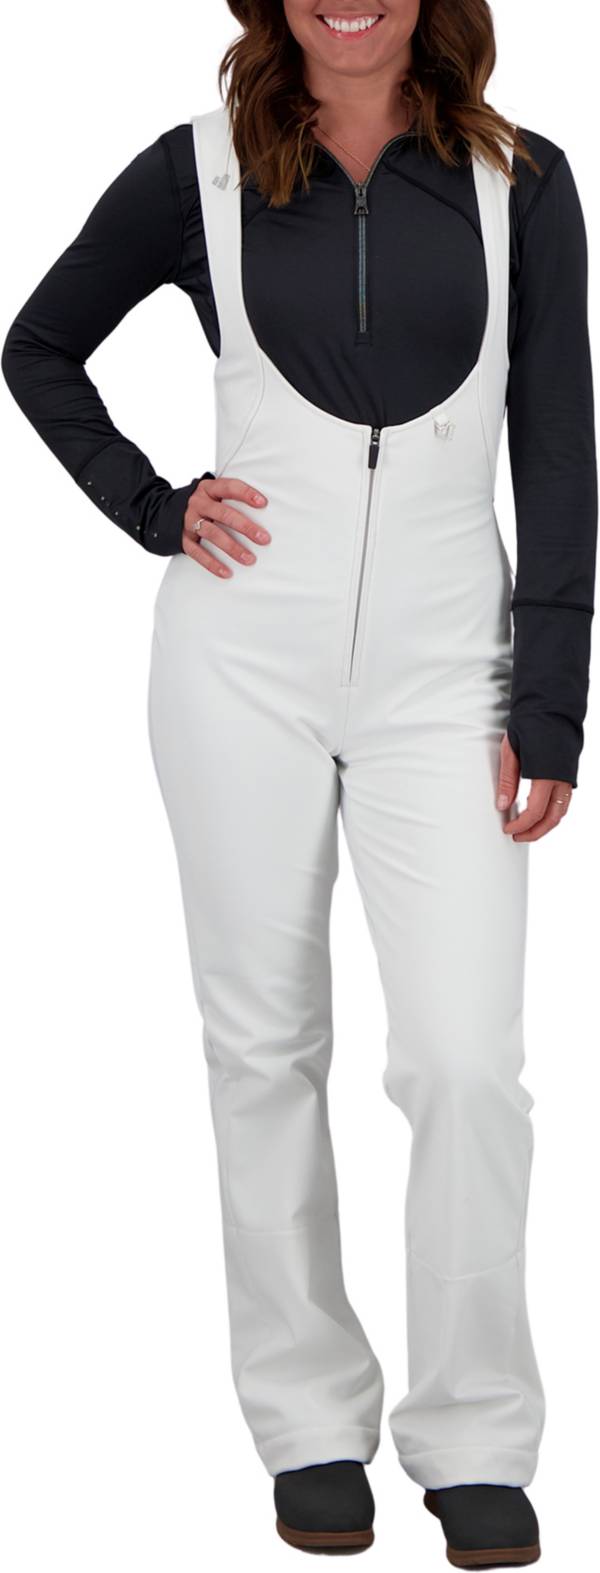 Obermeyer Women's Snell OTB Softshell Pants product image